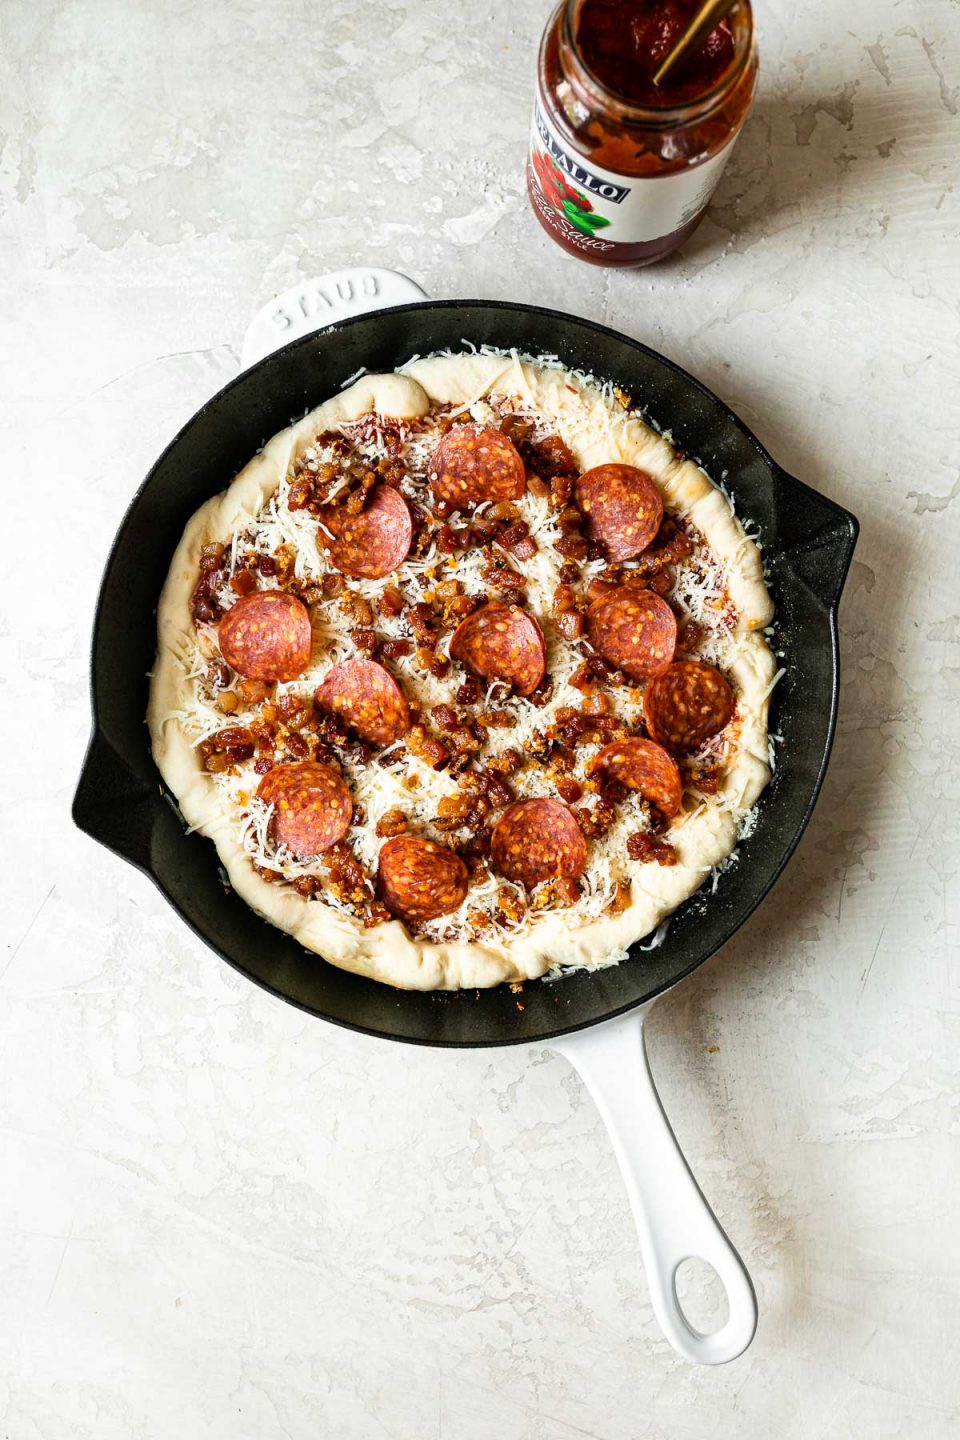 Pizza Amatriciana formed in white Staub cast iron skillet, topped with pepperoni. The skillet sits on a white surface, surrounded by parmesan cheese, a jar of DeLallo pizza sauce.